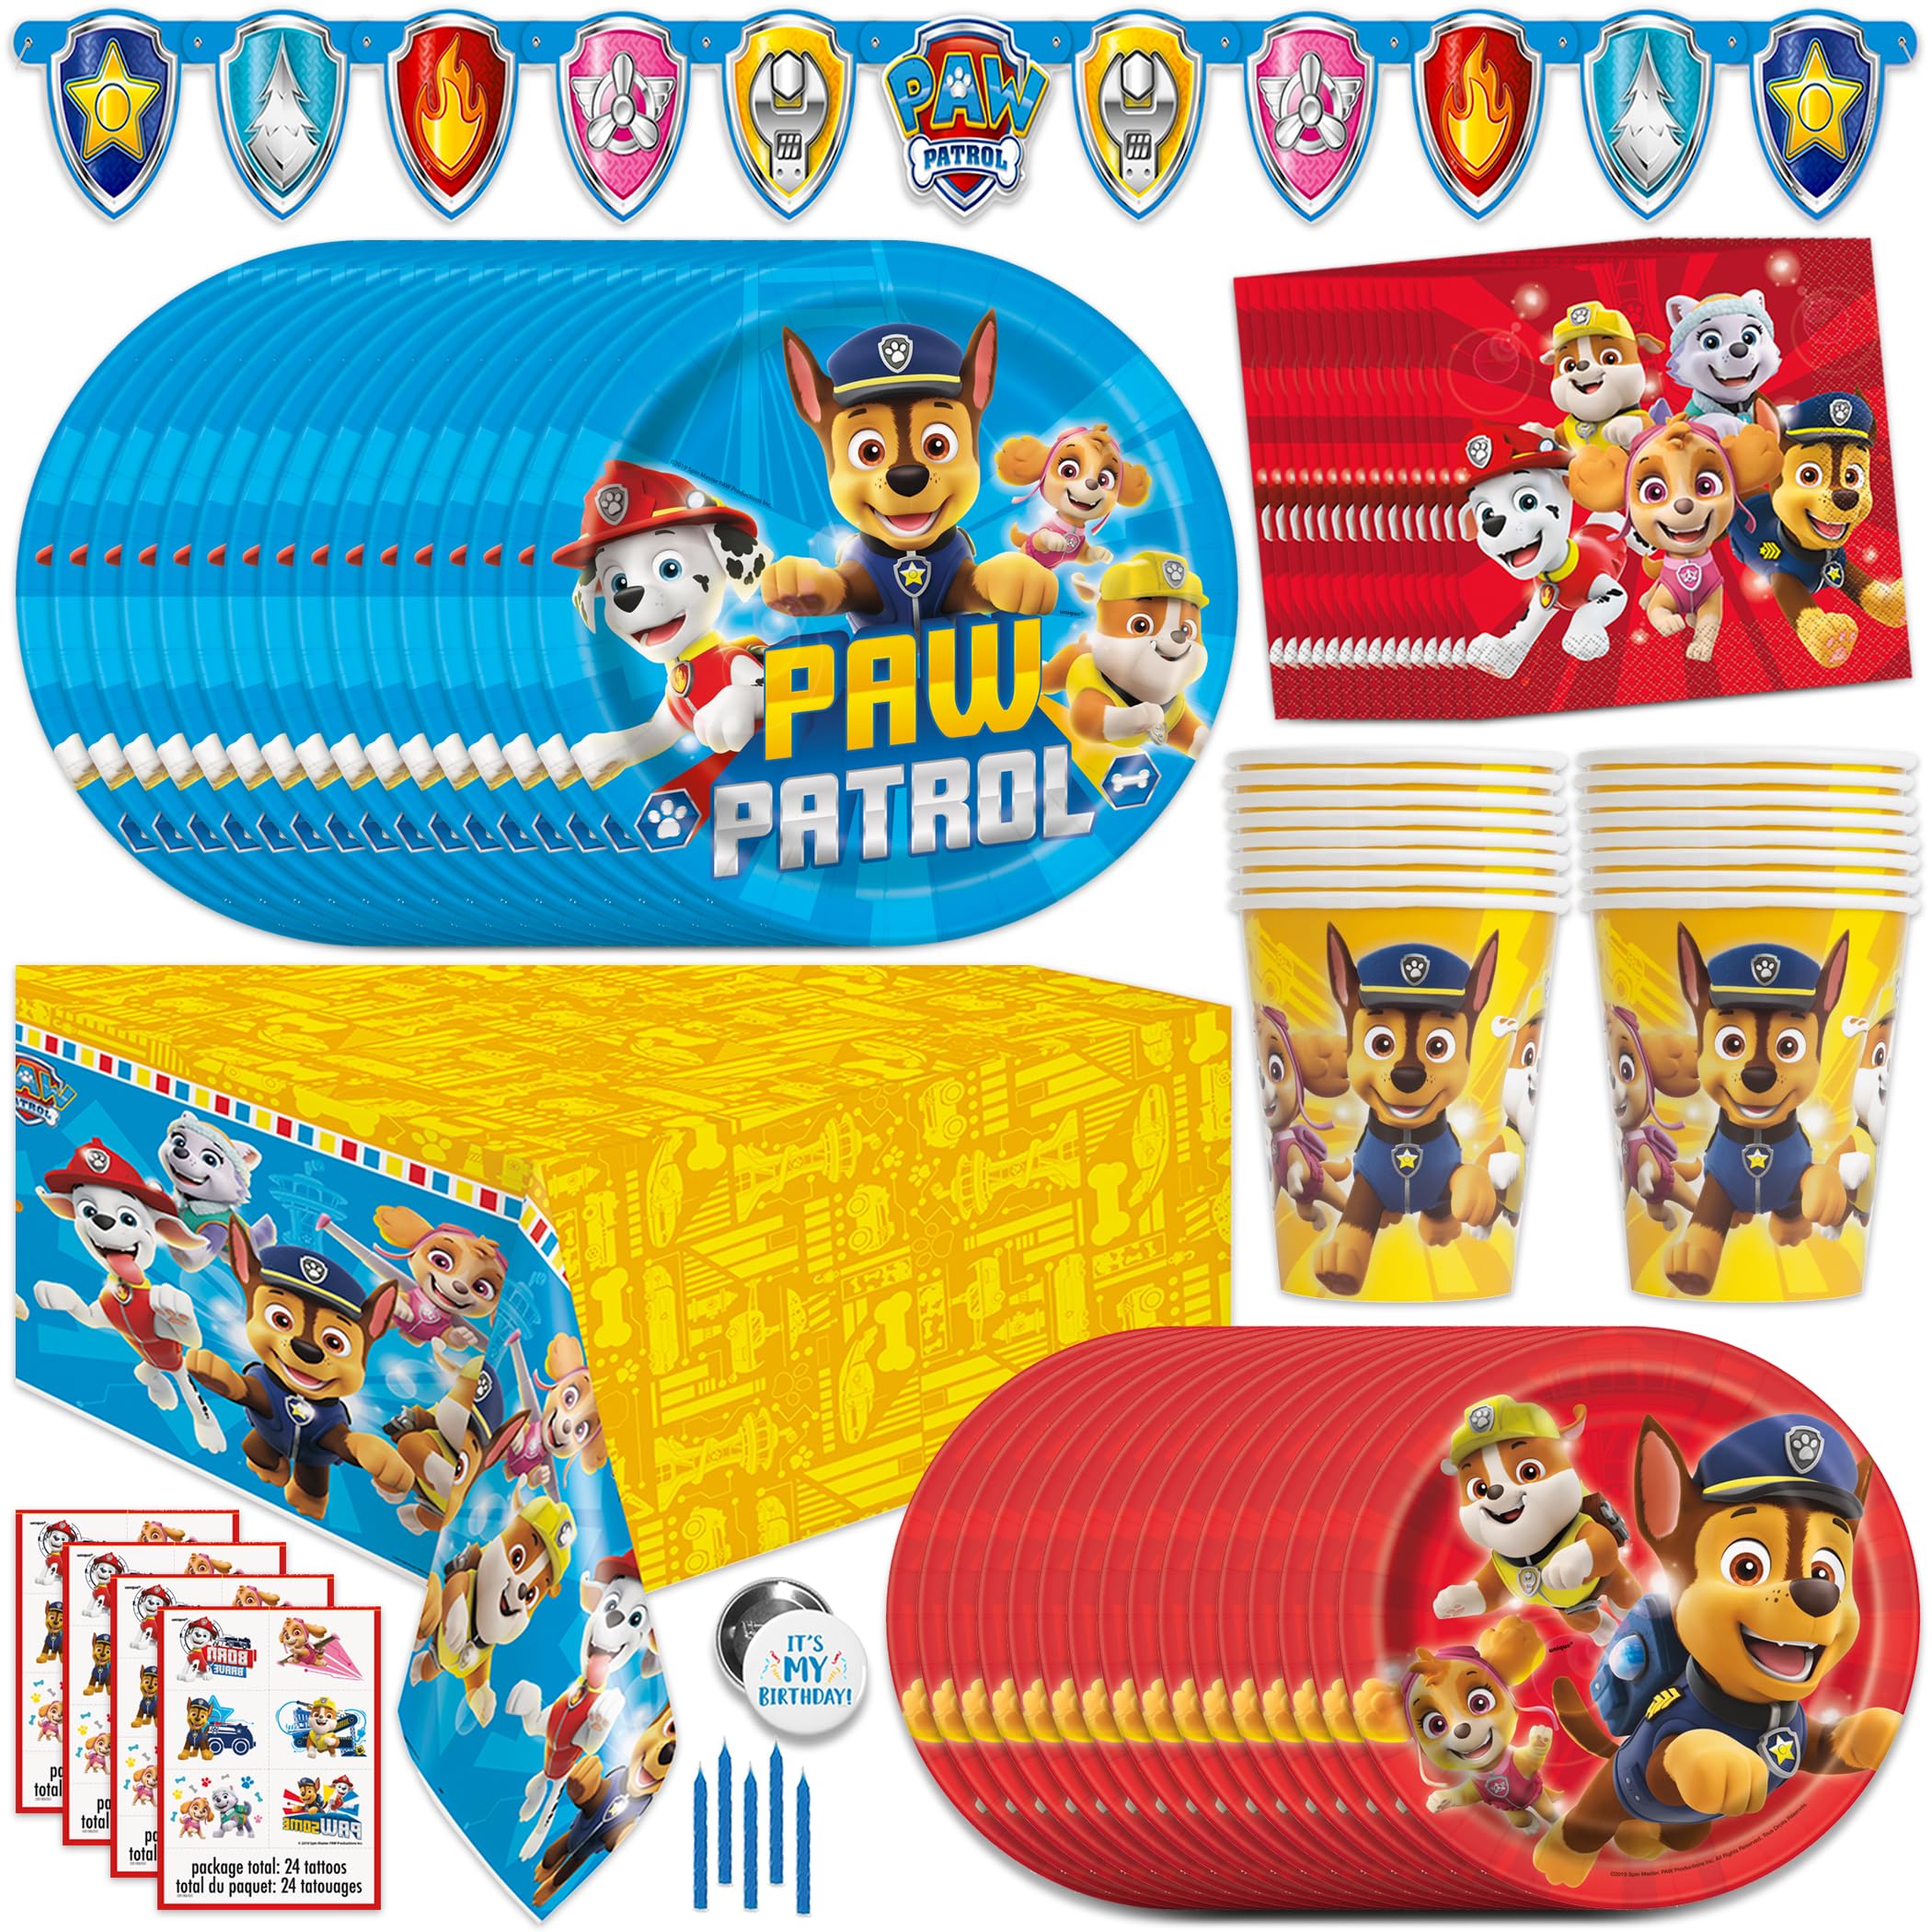 Unique Paw Patrol Party Supplies and Decorations, Paw Patrol Birthday Party Supplies, Serves 16 Guests, Officially Licensed with Table 